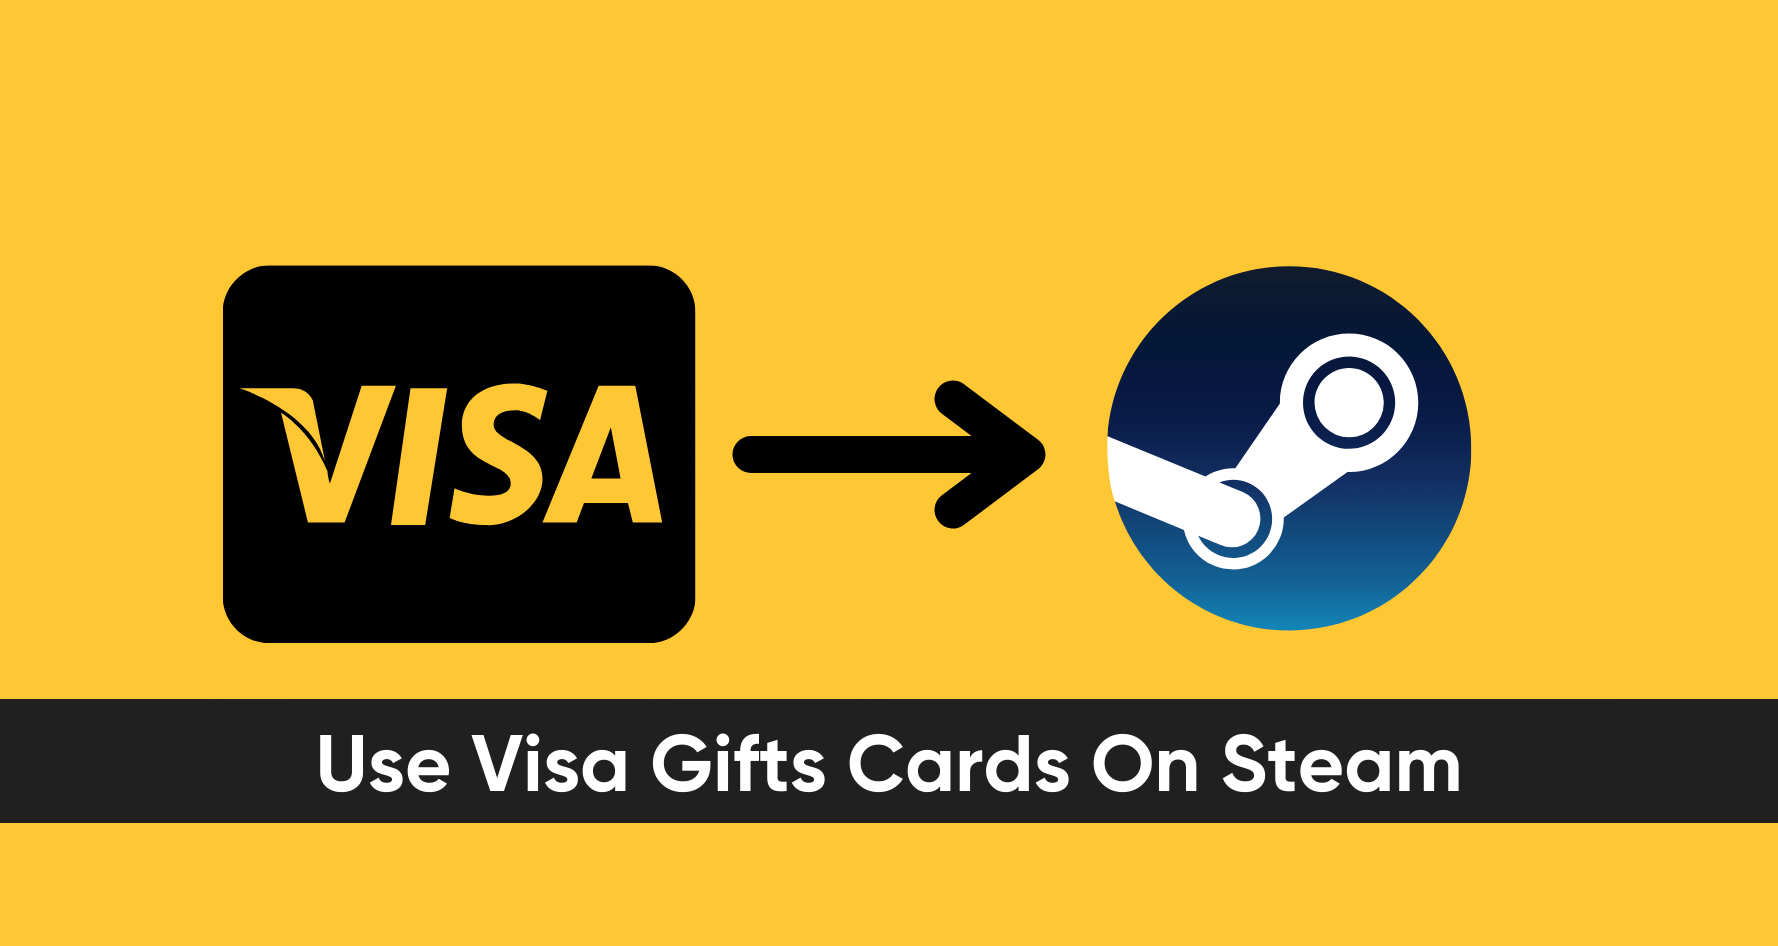 How To Use Visa Gifts Cards On Steam